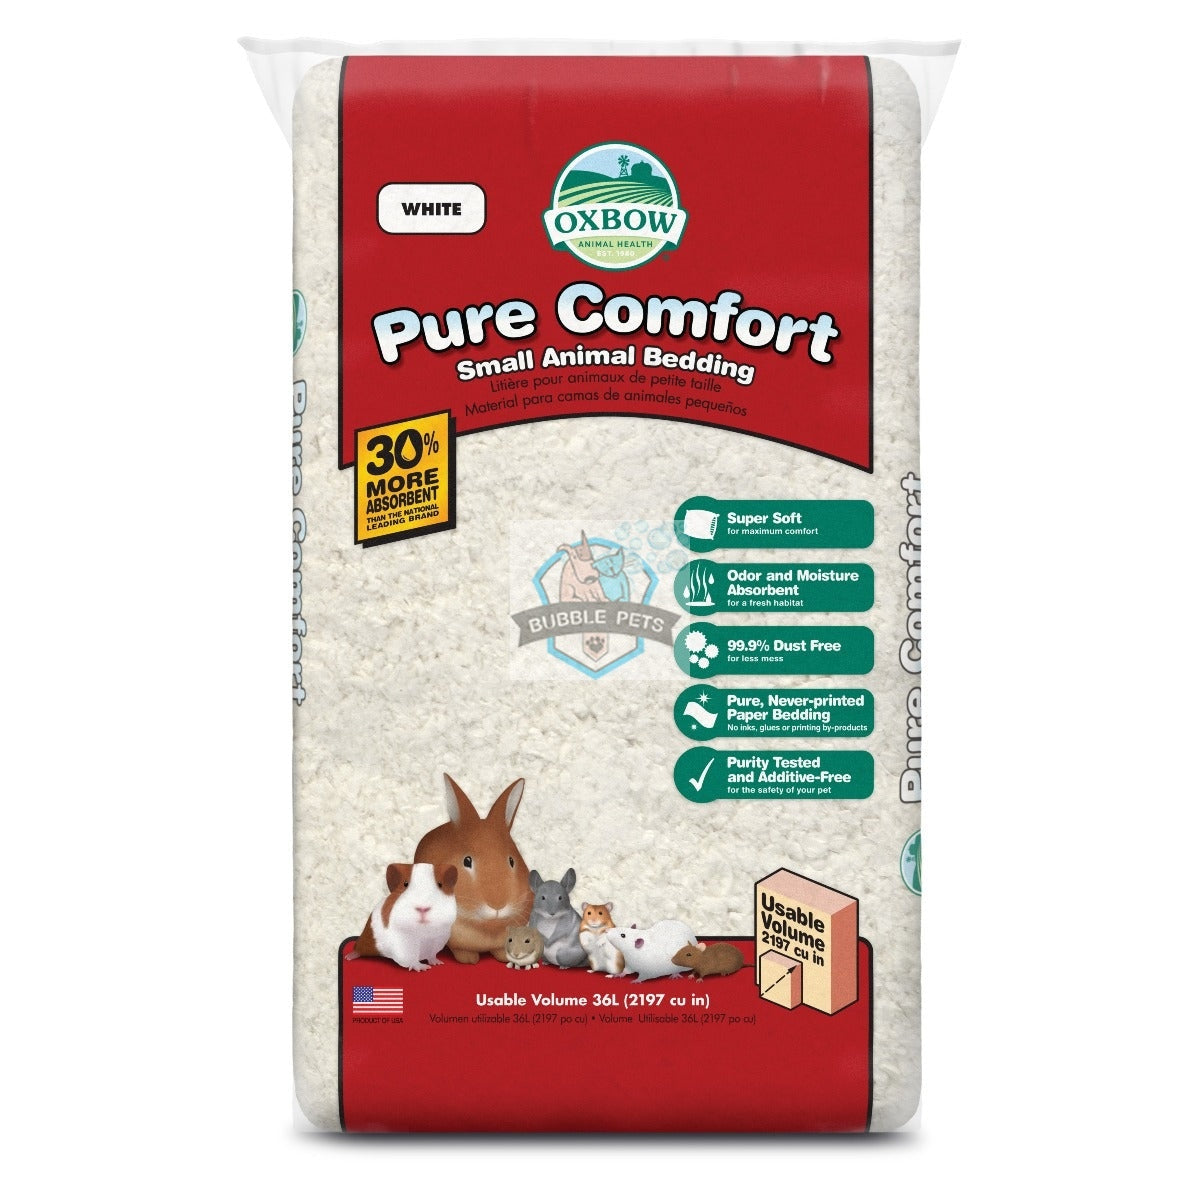 Oxbow Pure Comfort White Small Animal Bedding